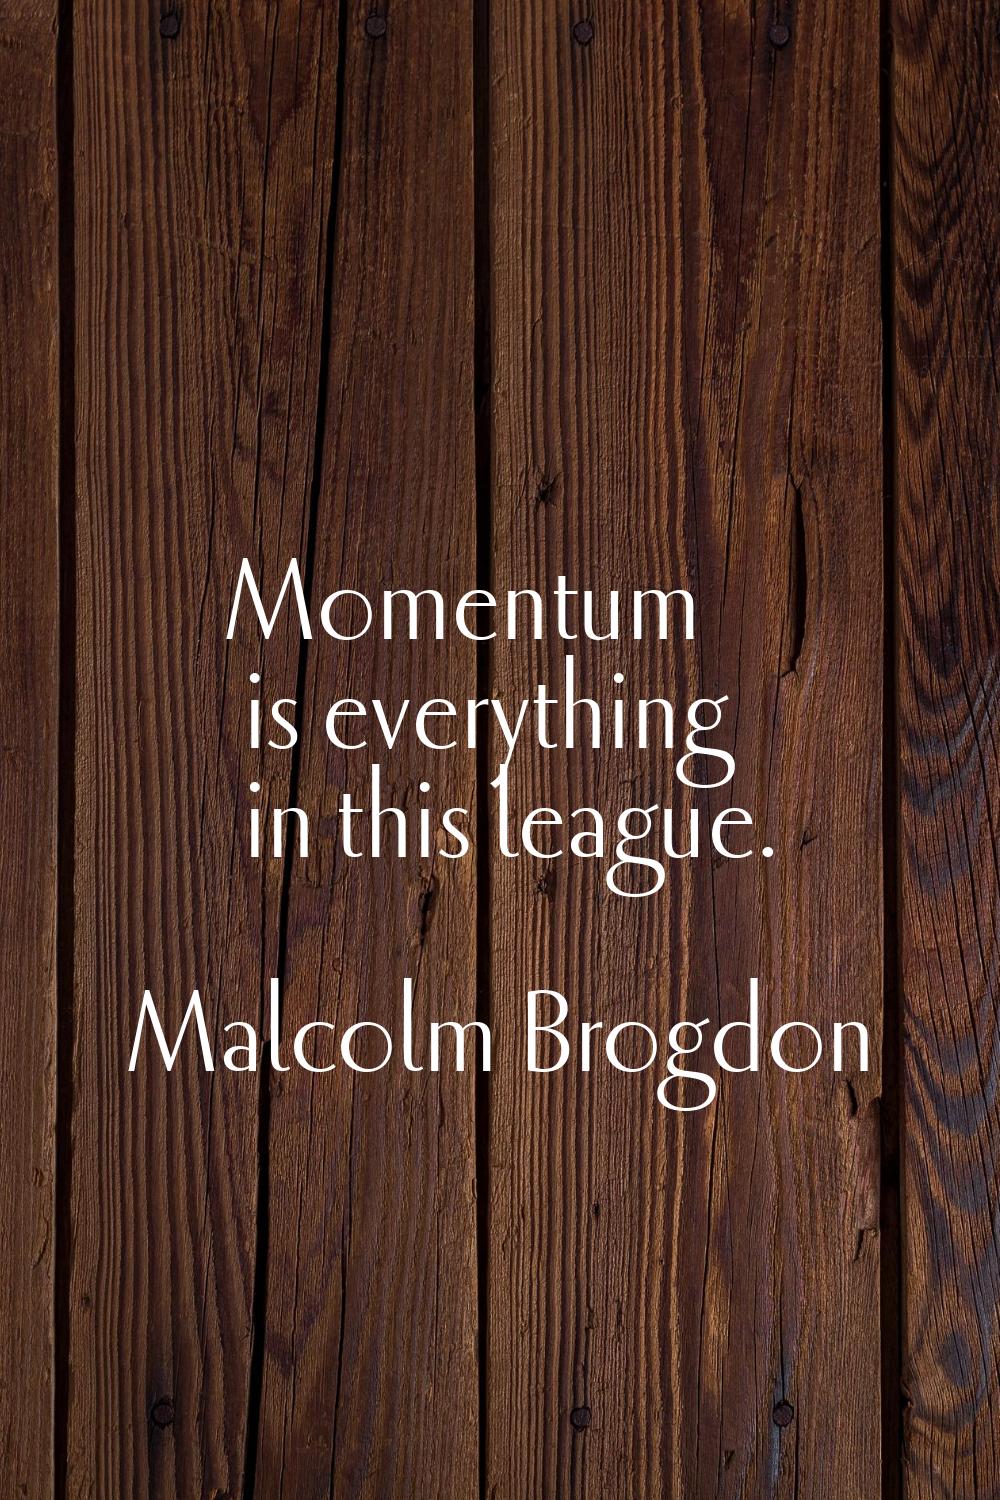 Momentum is everything in this league.